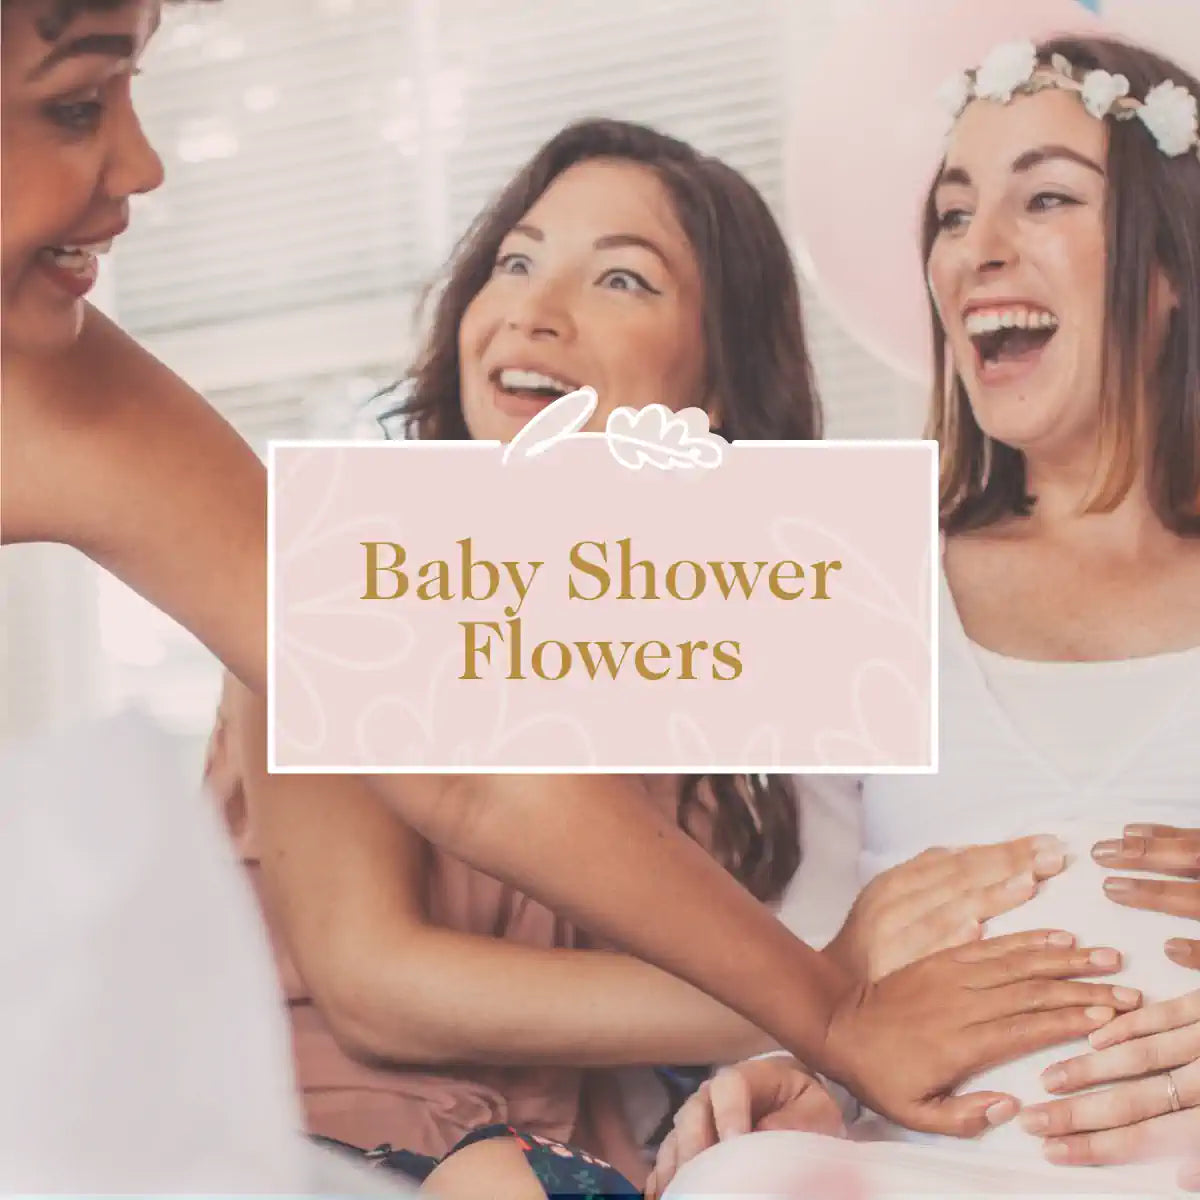 Baby Shower Flowers: Joyful Women Celebrating with a Pregnant Friend, Highlighting Beautiful Floral Arrangements for the Occasion. Fabulous Flowers and Gifts.